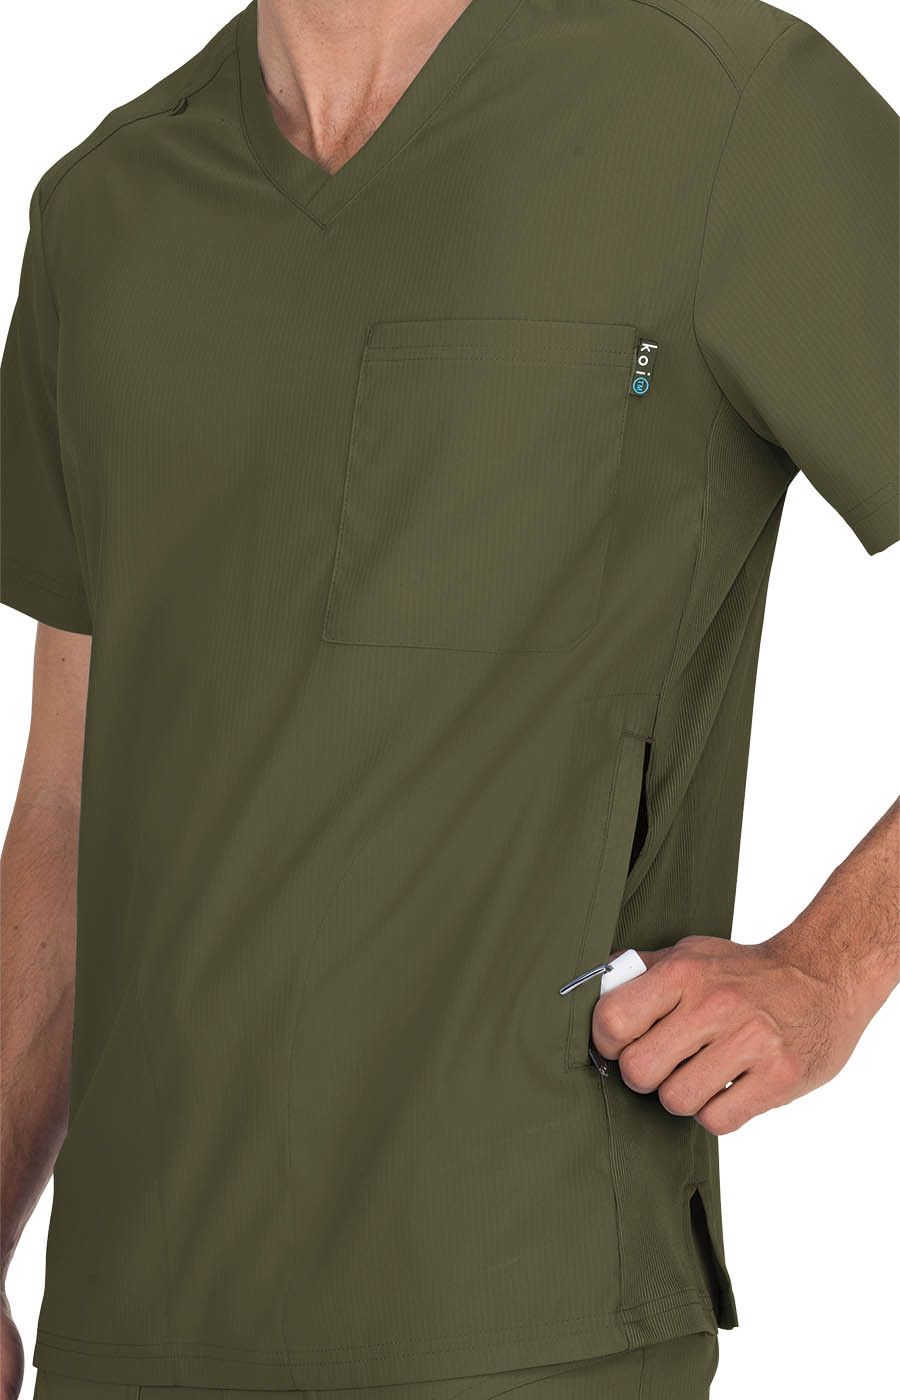 force-top-olive-green